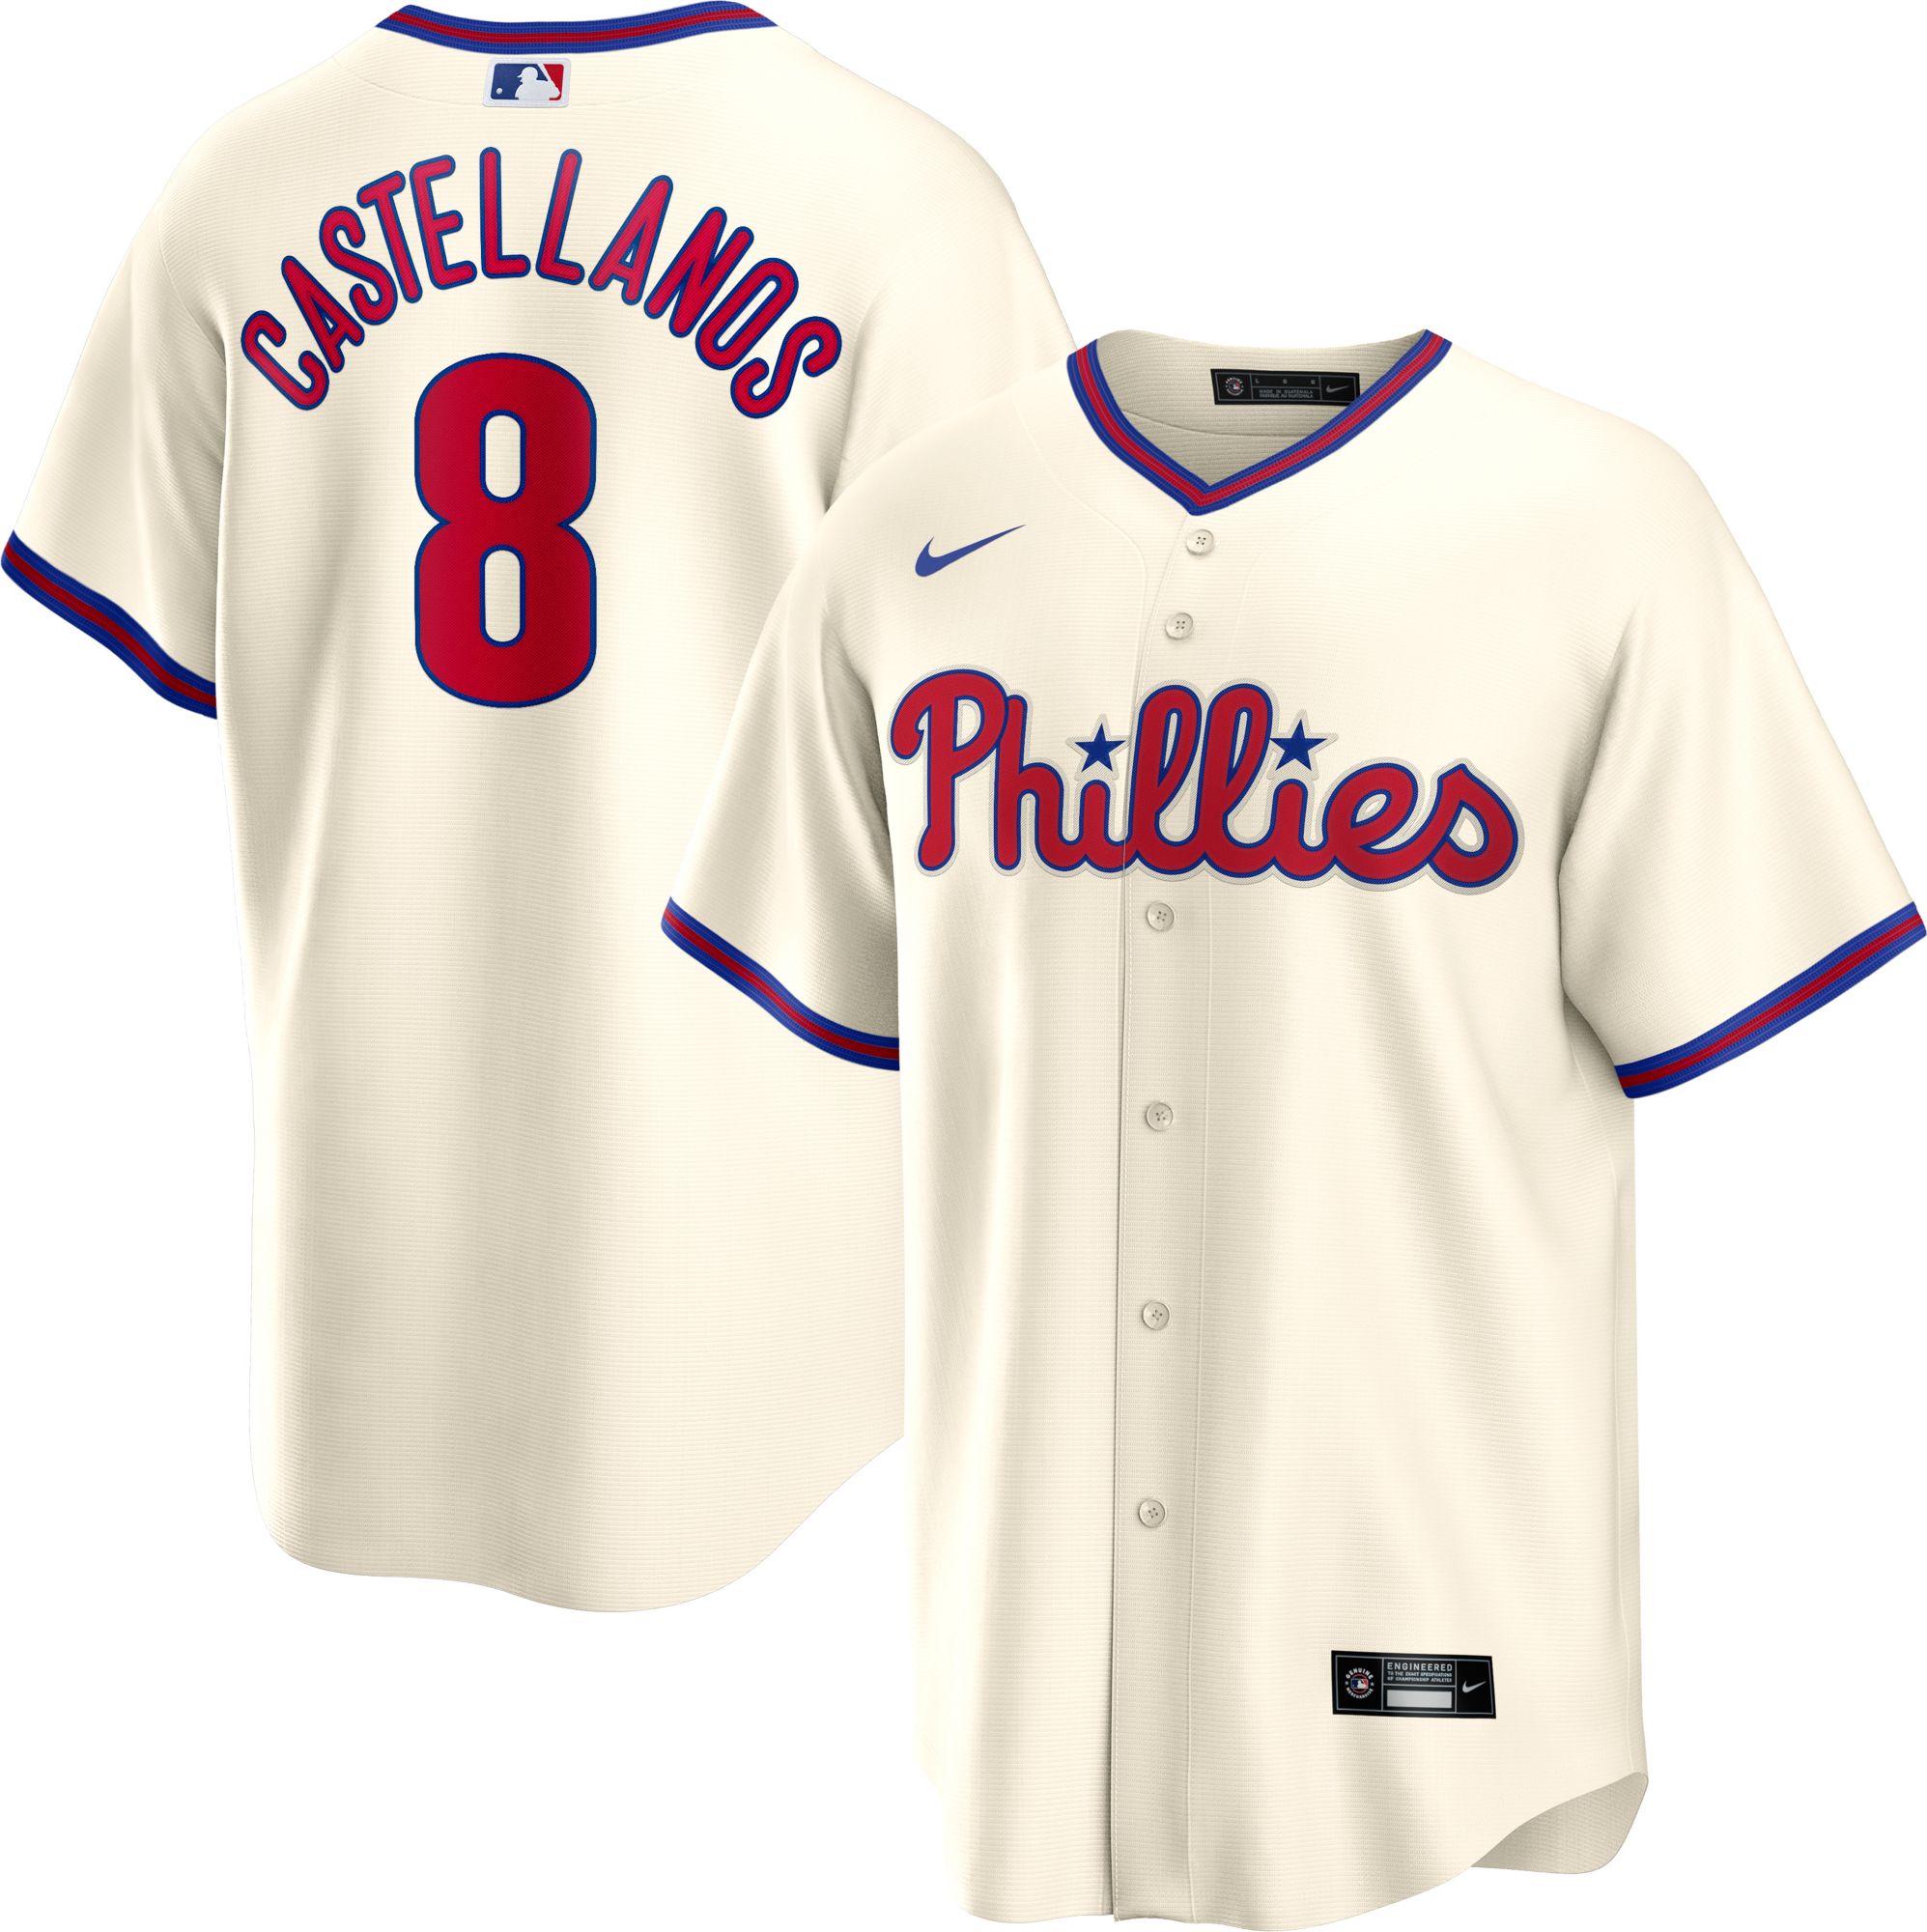 First Look: Phillies road and cream jerseys with Nike Swoosh